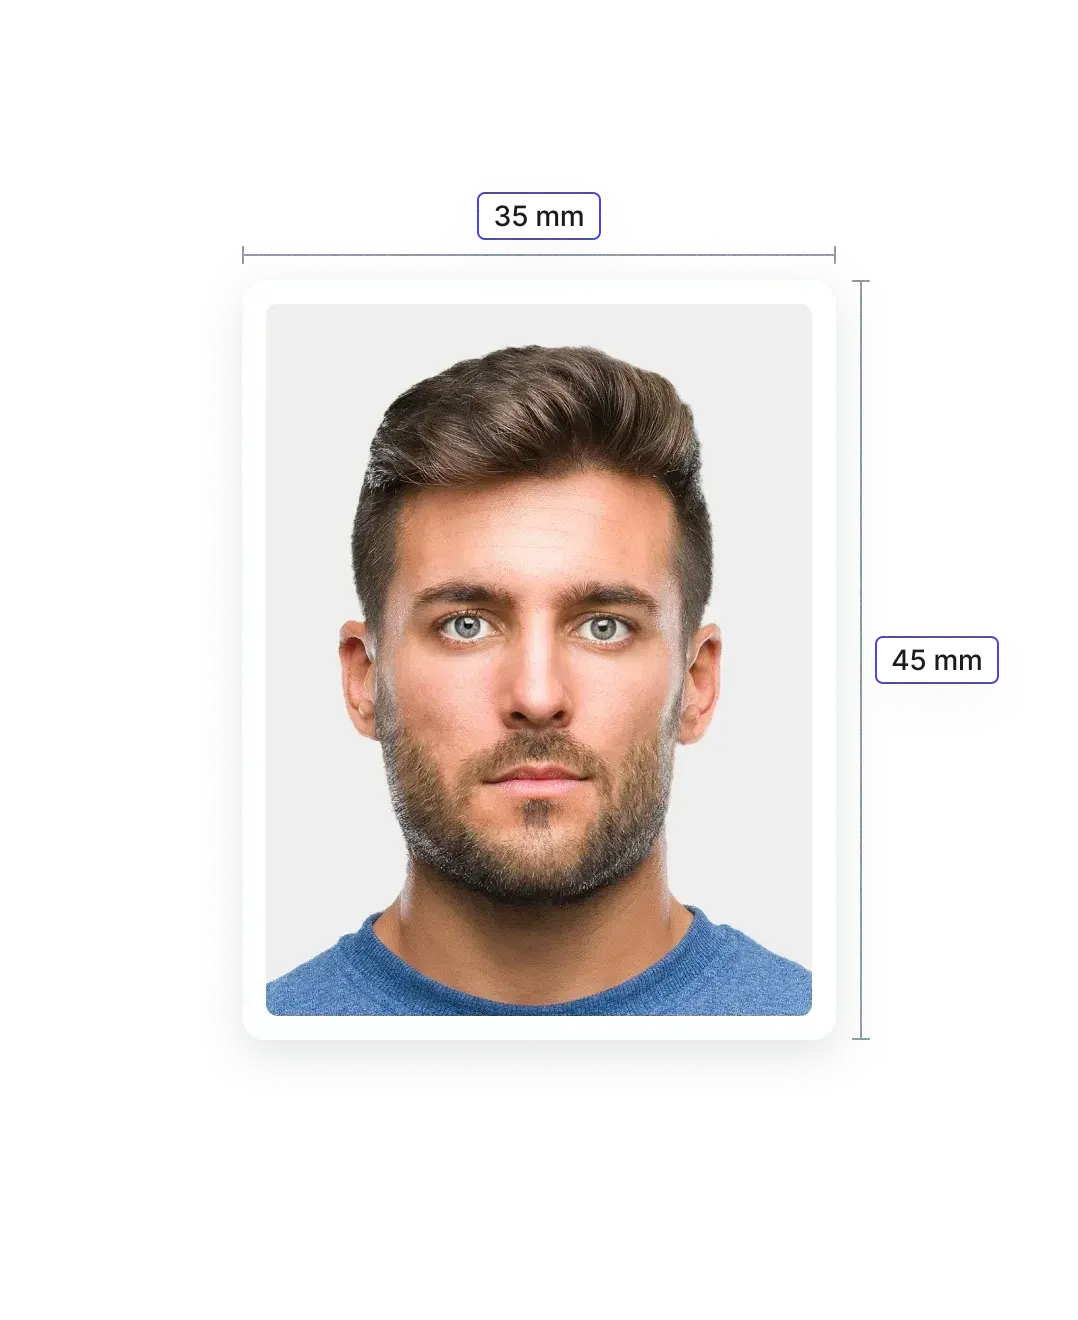 France Visa Photo: Size and Requirements